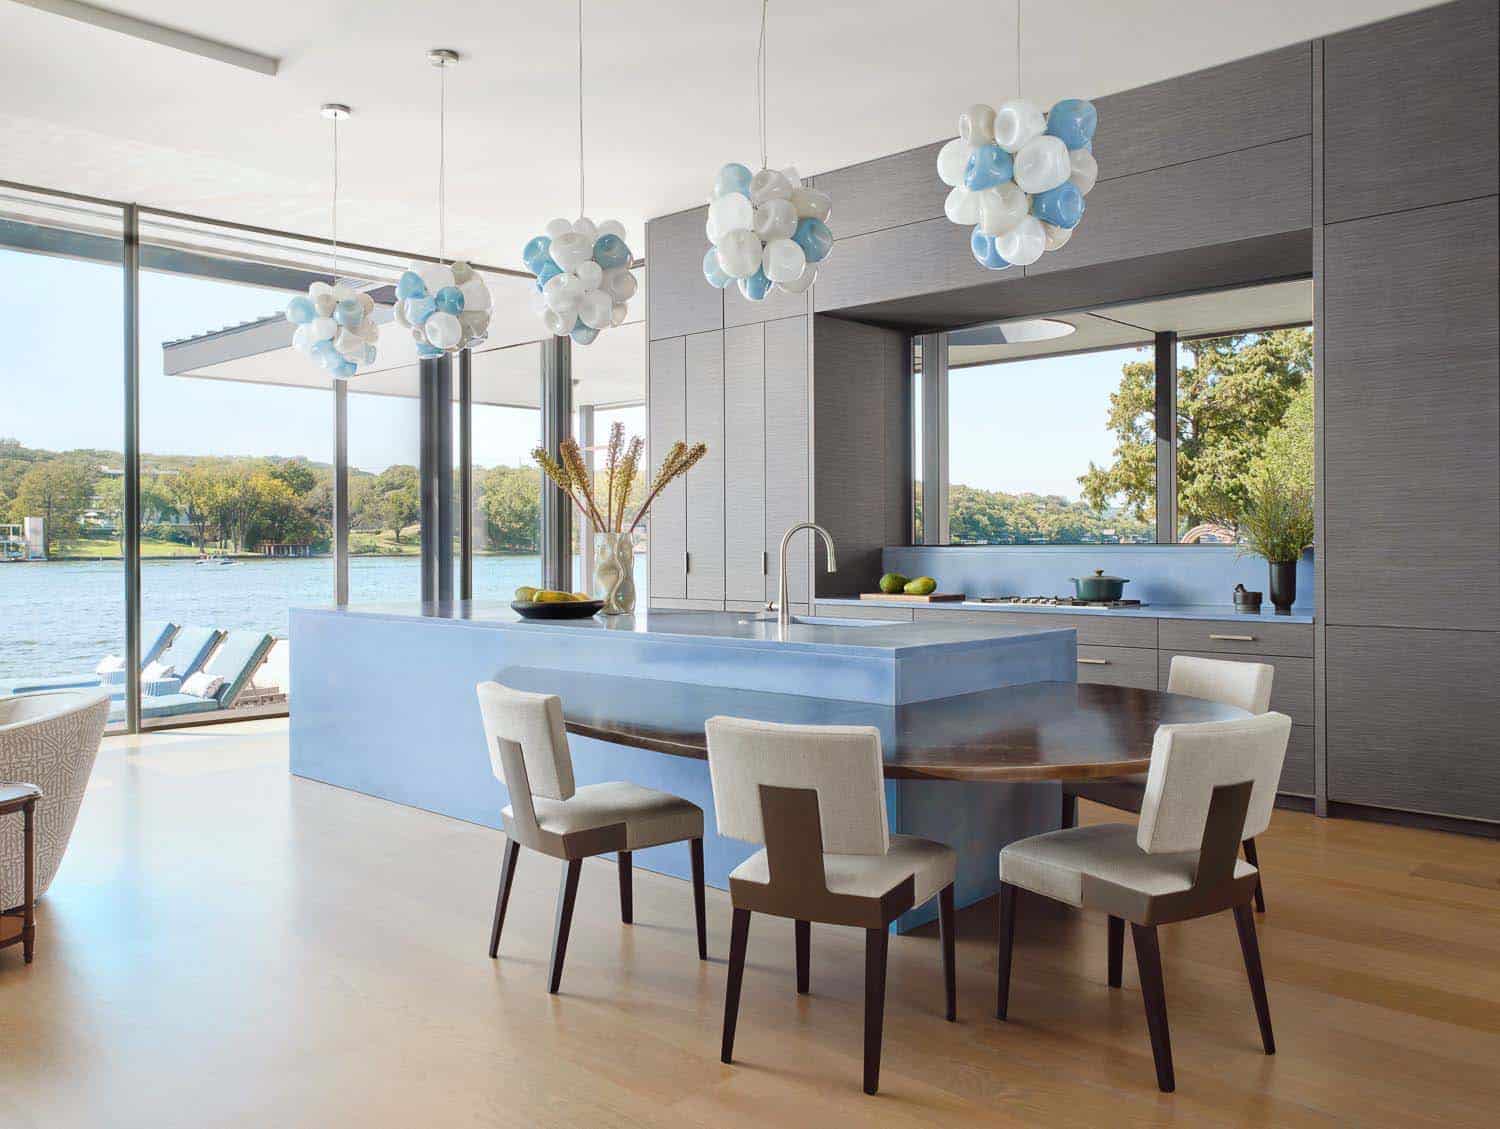 modern kitchen with pendant lights over the island